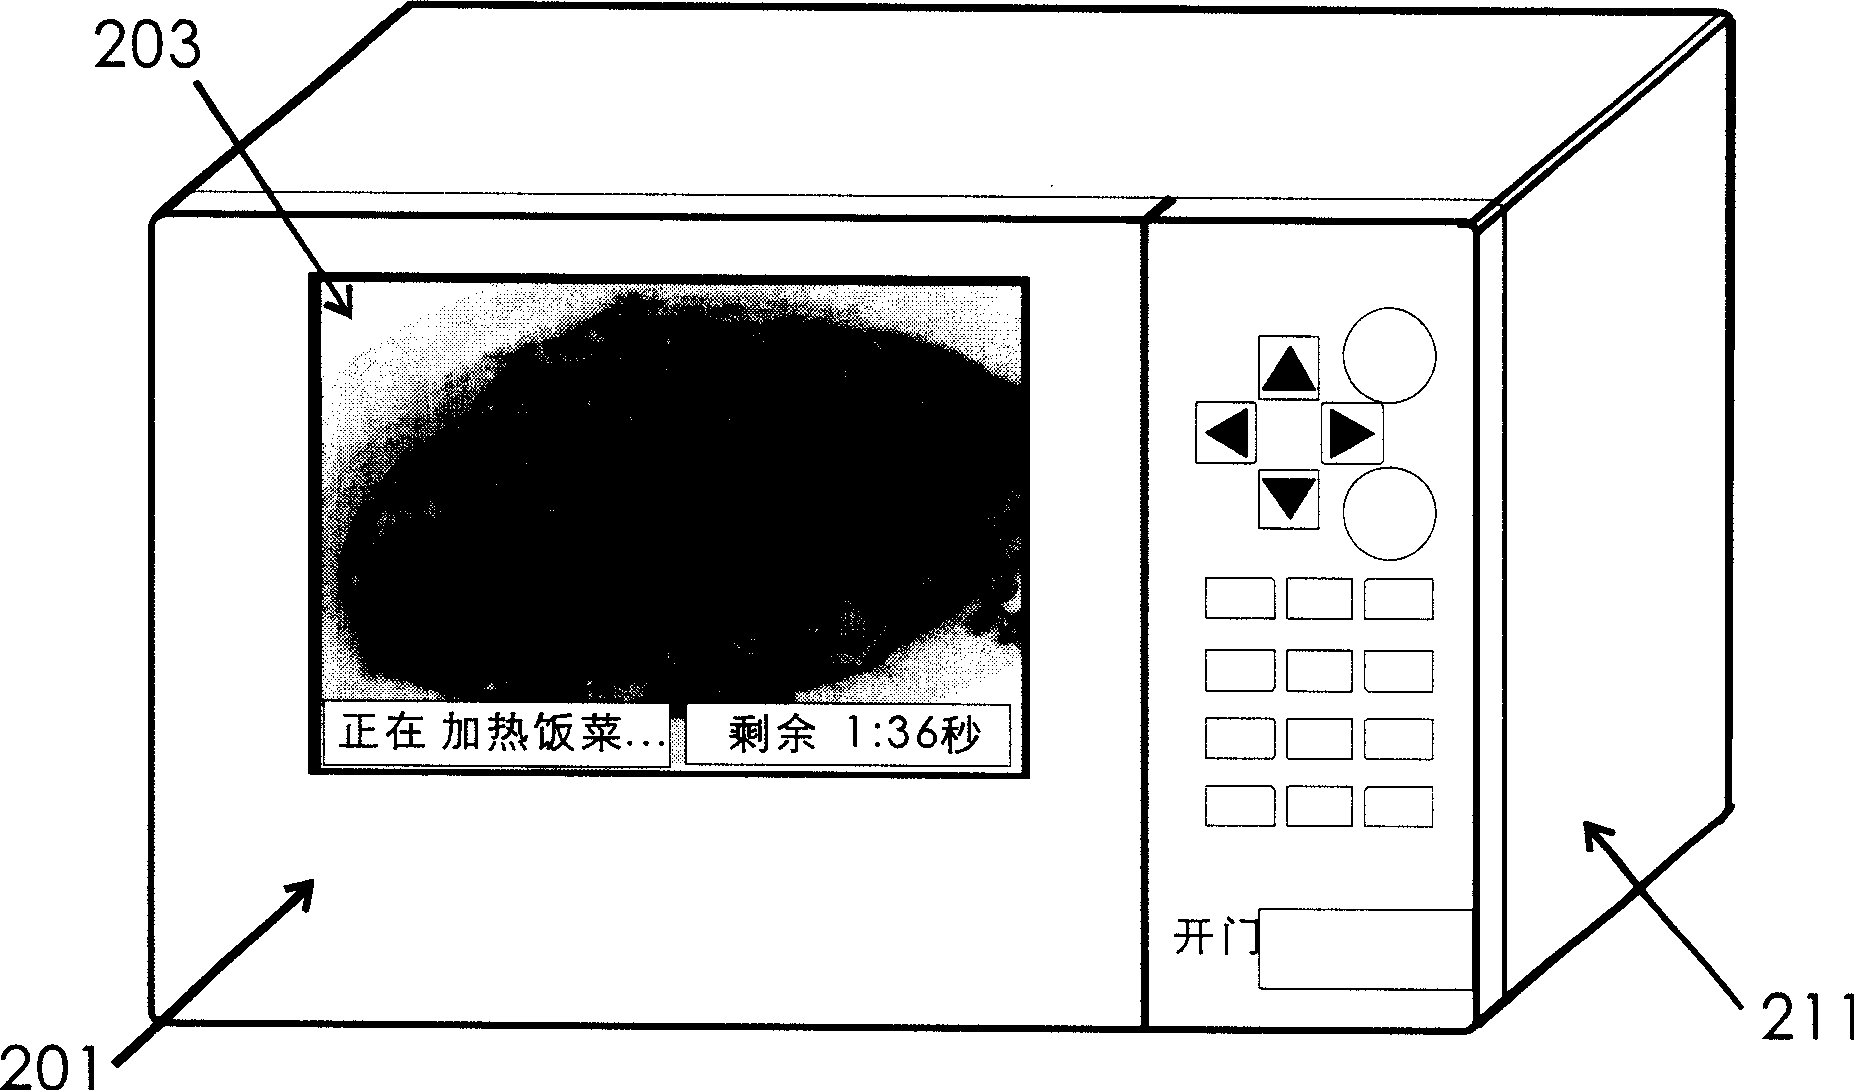 Microwave oven without microwave radiation and its operation and control method